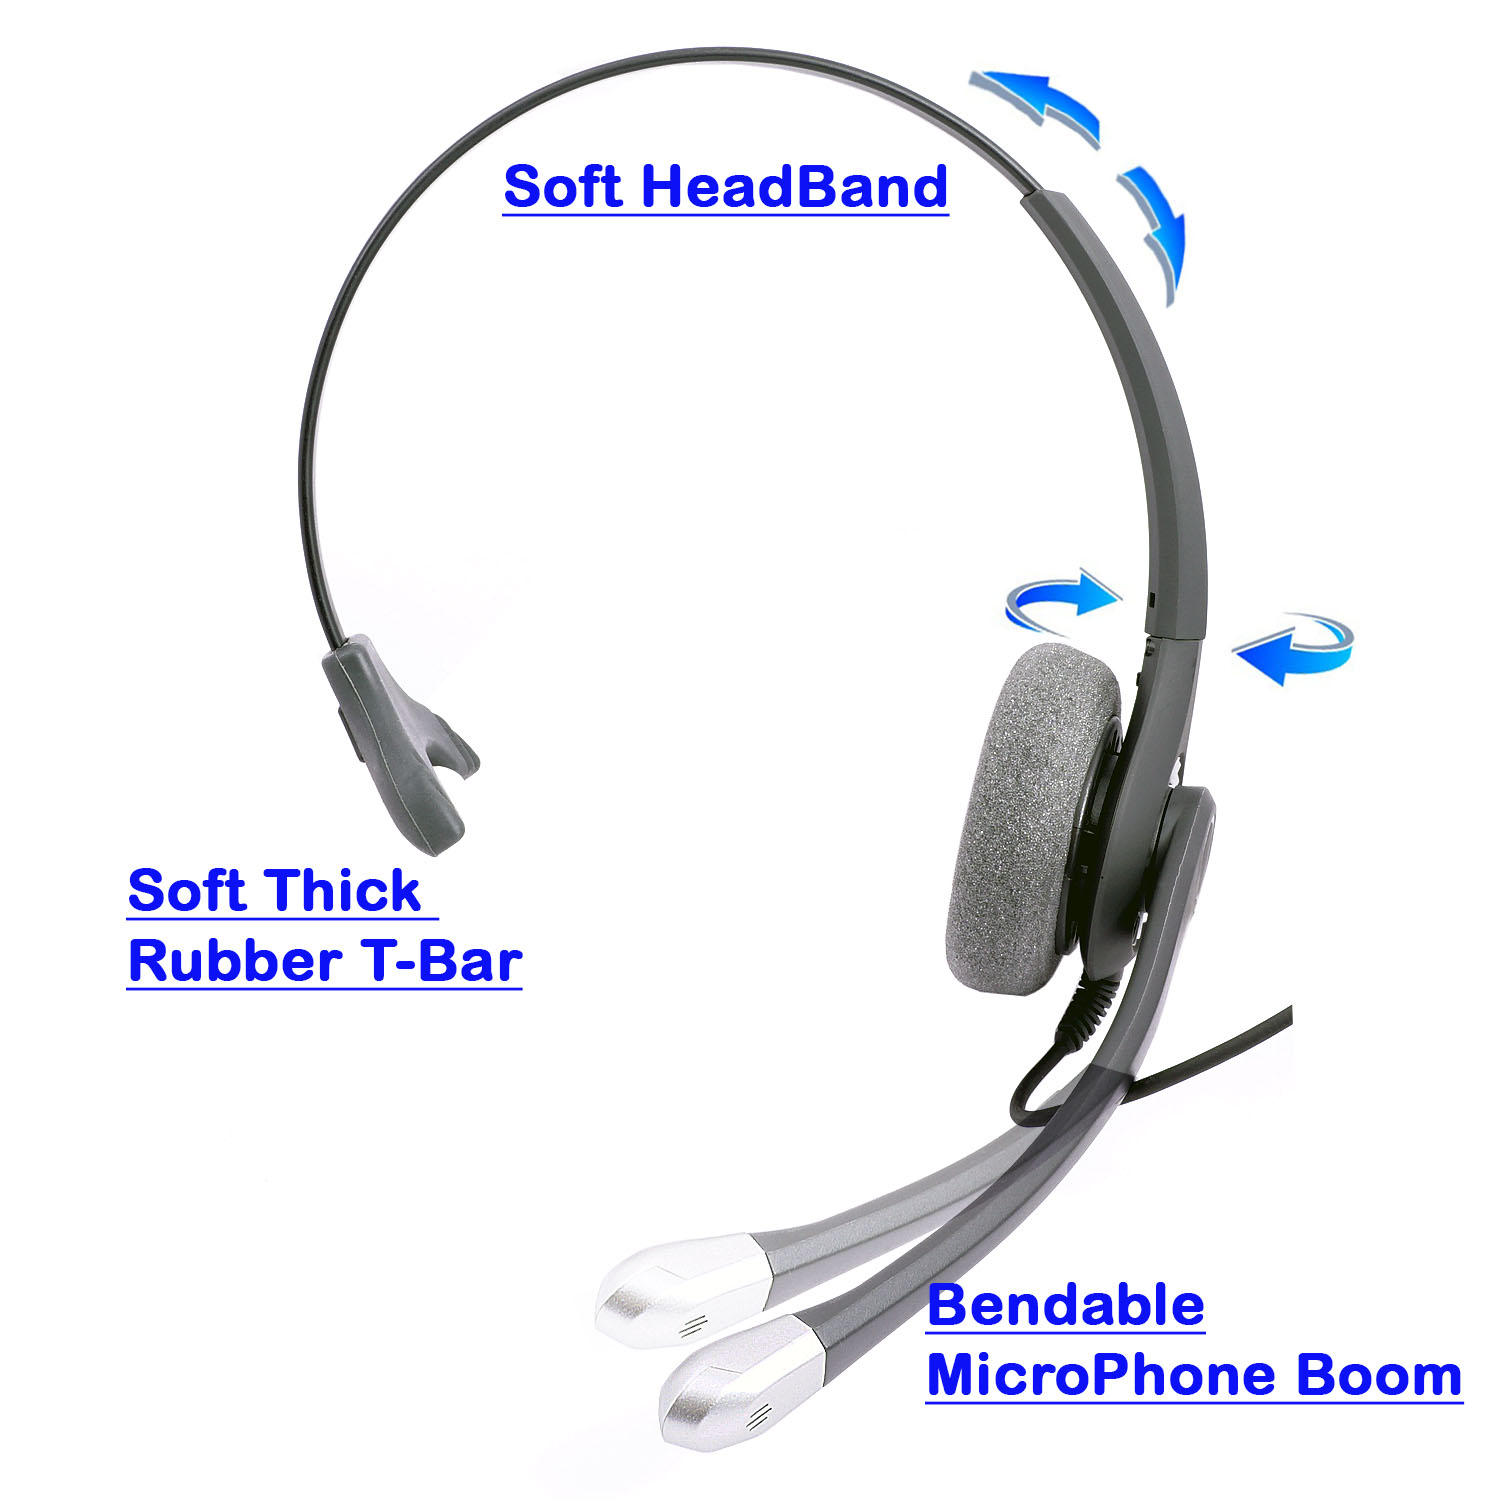 2.5mm Monaural Headset + 2.5 mm Headset Plug Combo for Desk Phone as Office Headset - image 5 of 7